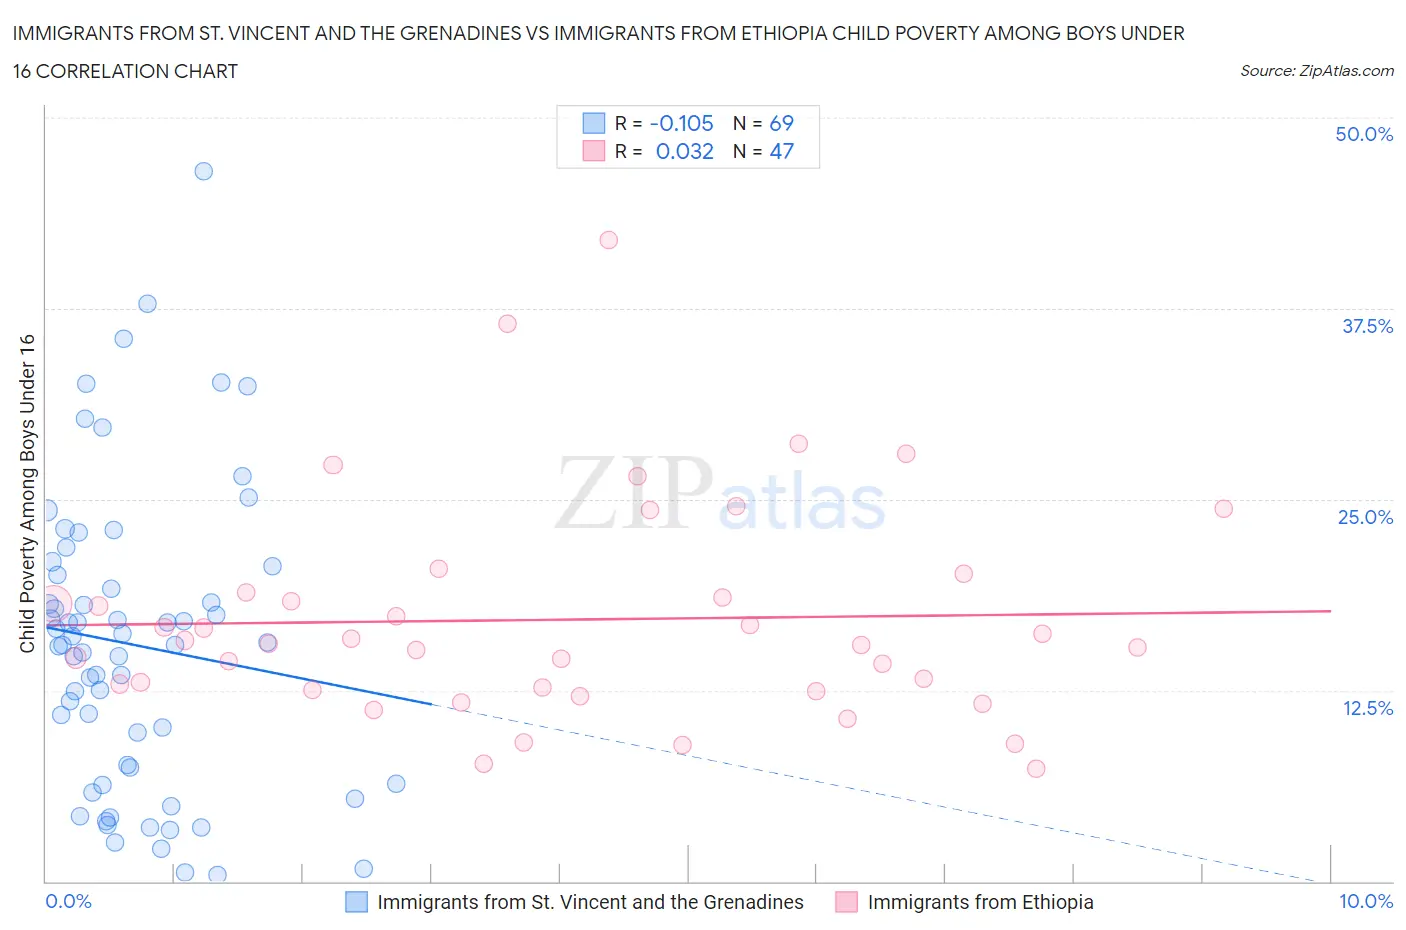 Immigrants from St. Vincent and the Grenadines vs Immigrants from Ethiopia Child Poverty Among Boys Under 16